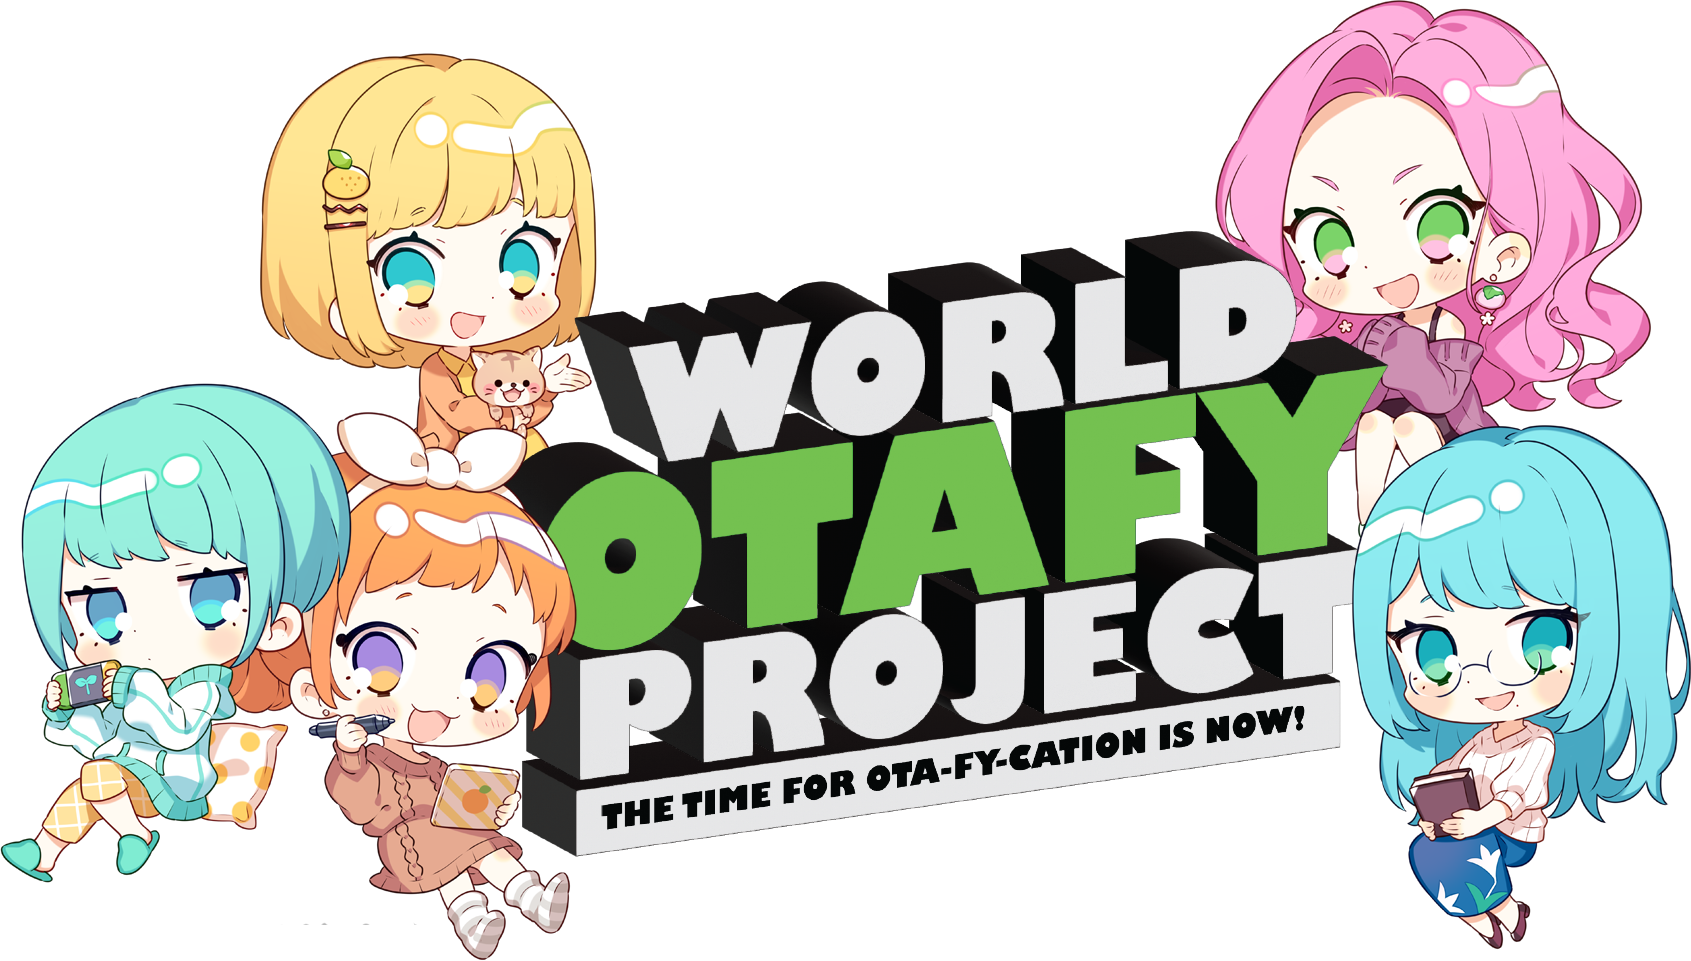 WORLD OTAFY PROJECT - THE TIME FOR OTA-FY-CATION IS NOW!